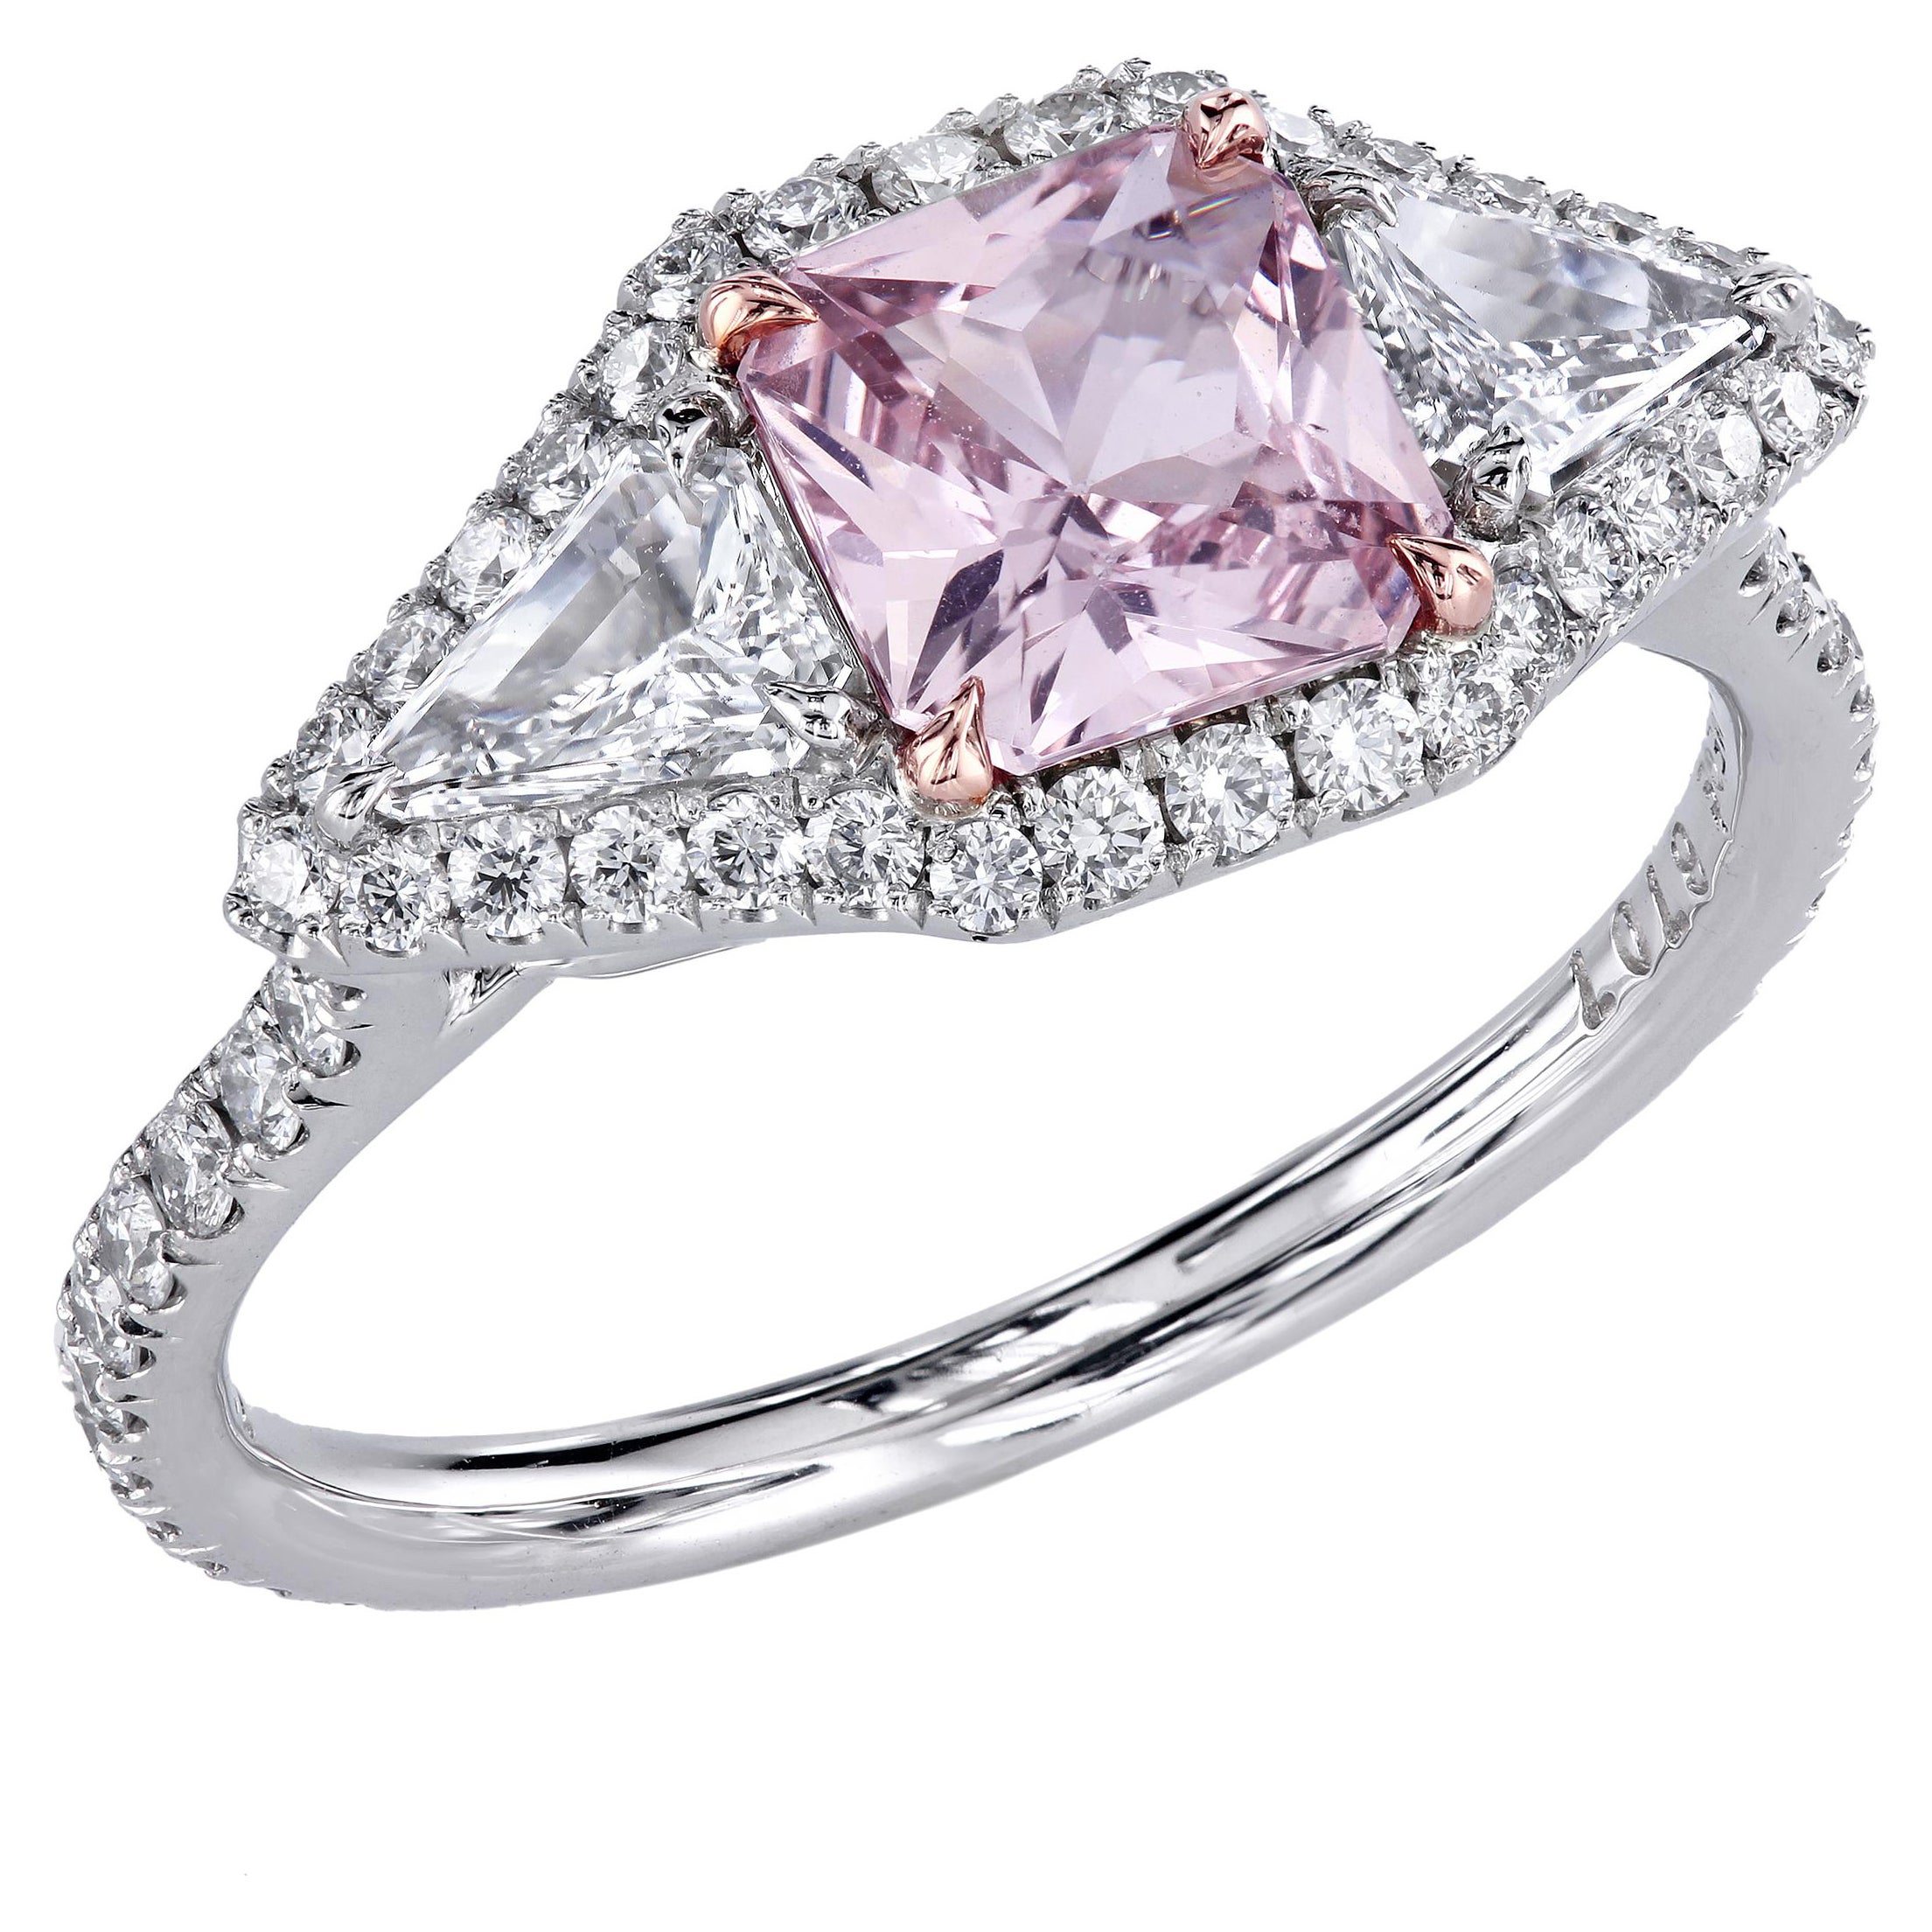 Leon Mege Montpassier Style Platinum Diamond Ring with a Natural Pink Sapphire